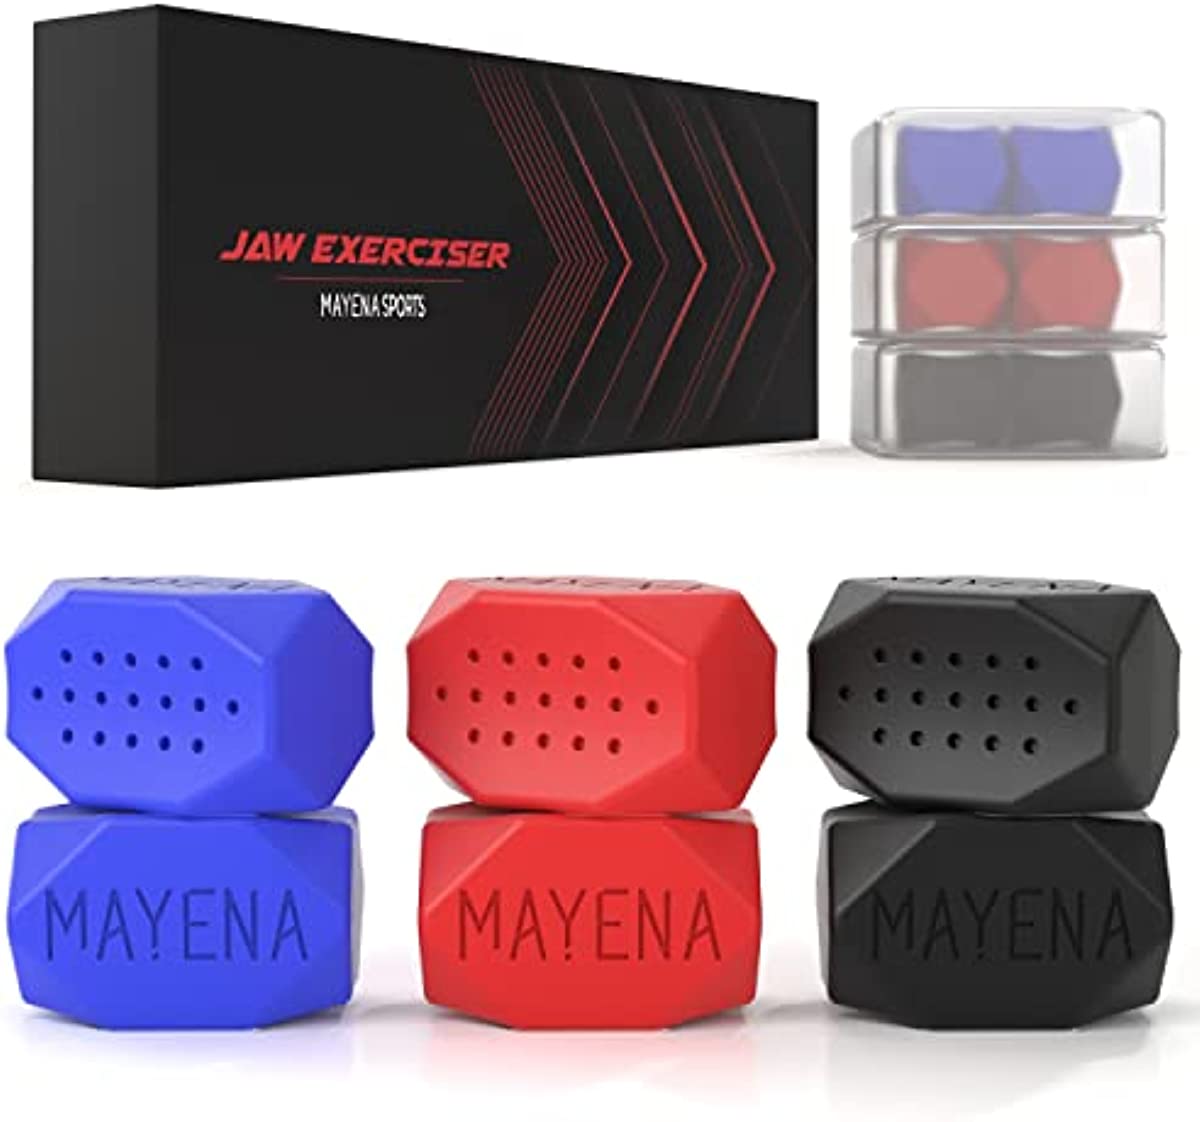 Mayena Sports Jawline Exerciser for Men & Women – 3 Resistance Levels (6 pcs) Silicone Jaw Exerciser Tablets – Powerful Jaw Trainer for Beginner, Intermediate & Advanced Users – Slims & Tones the Face